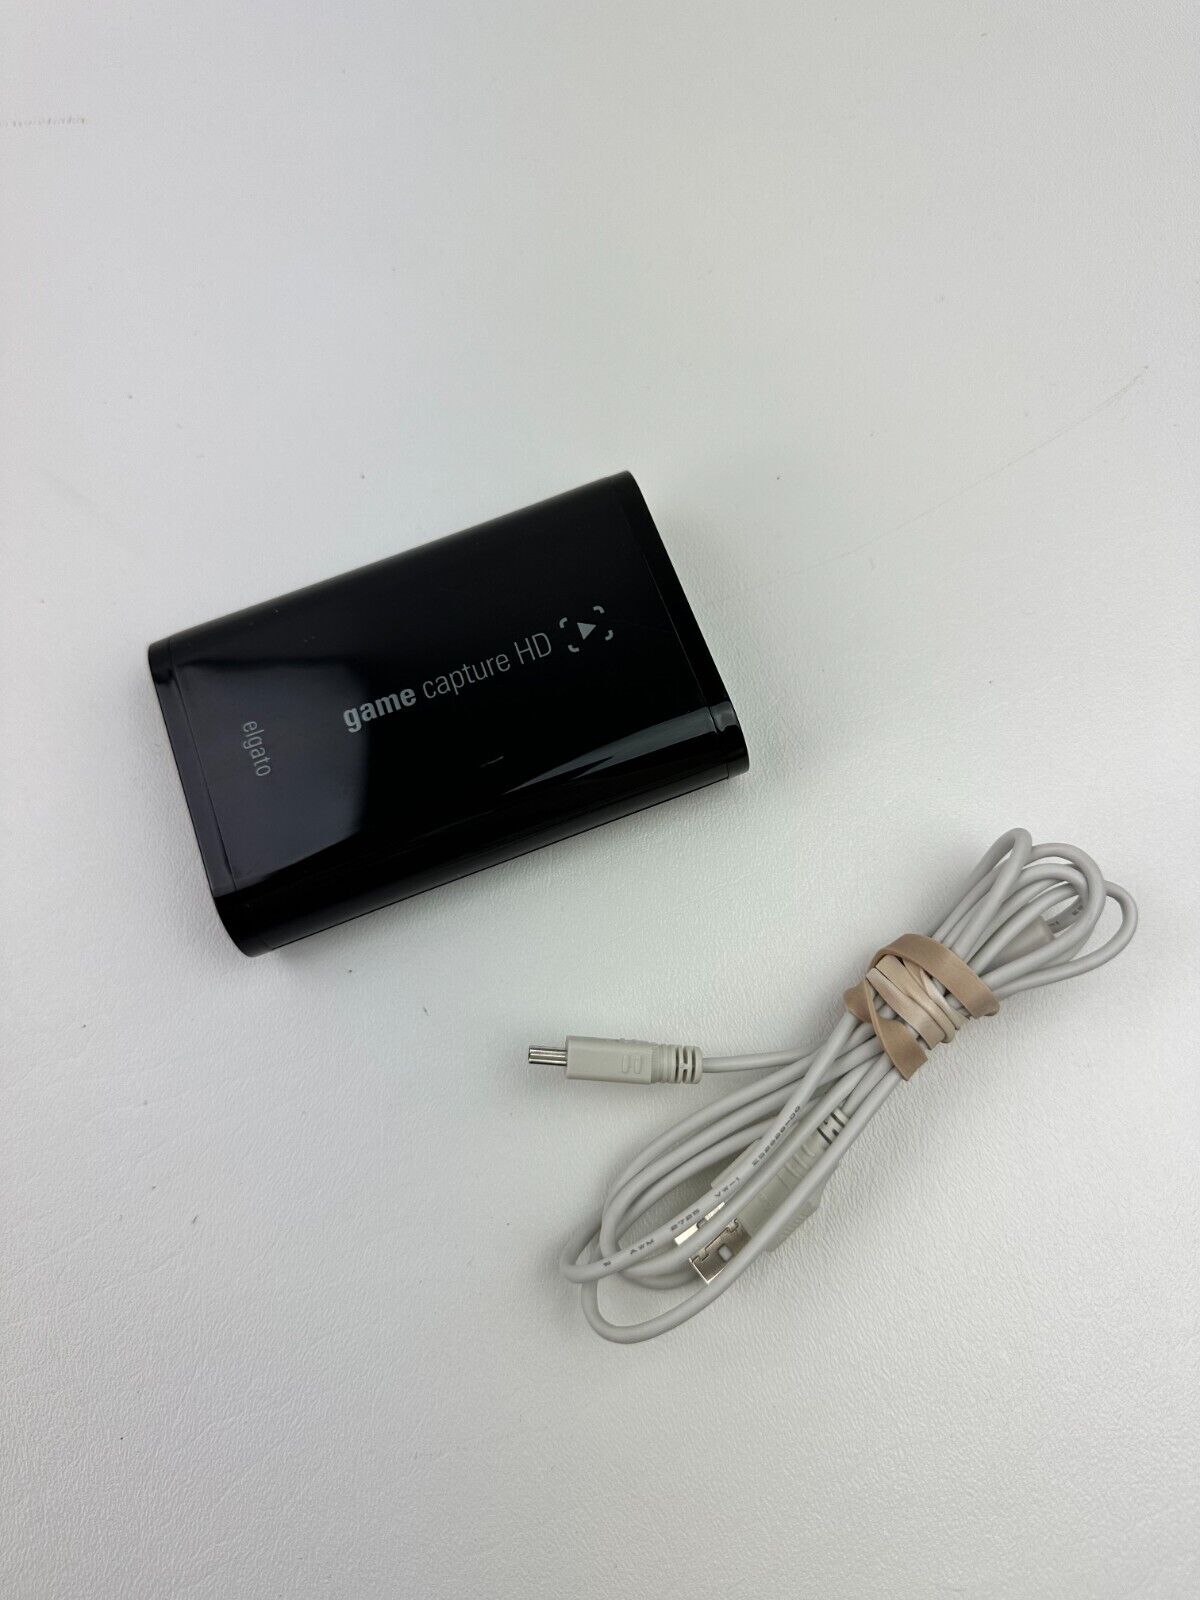 Elgato HD High Definition Game Capture Recorder Only With USB Cord Tested